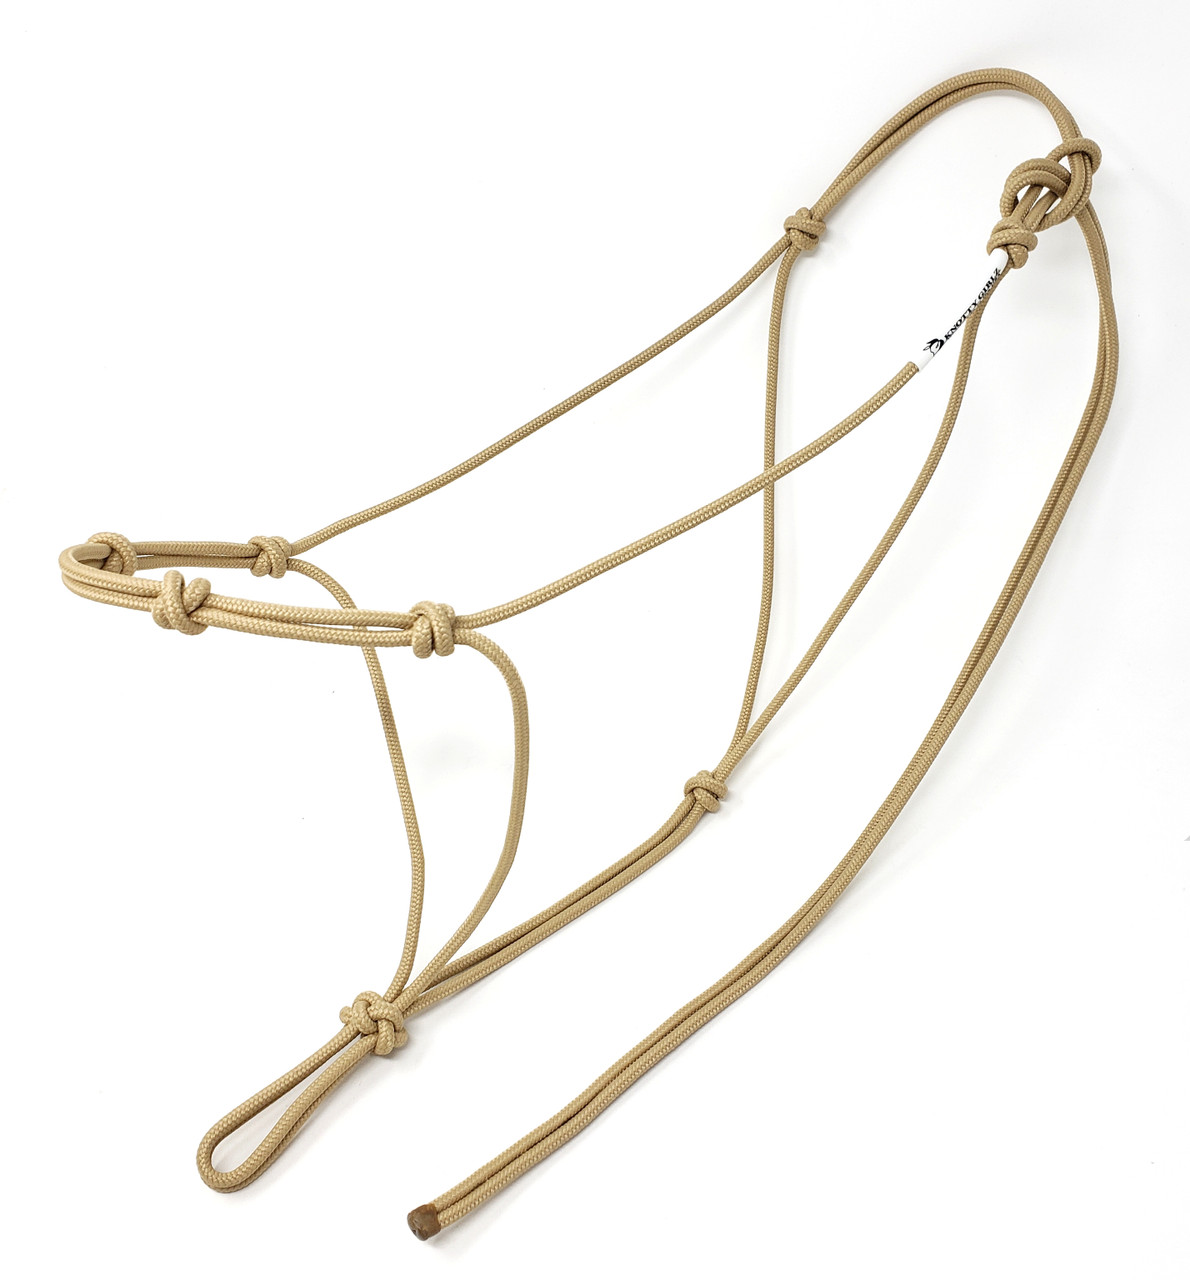 Natural Horsemanship Stiff 4-knot Rope Halters made from 3/16